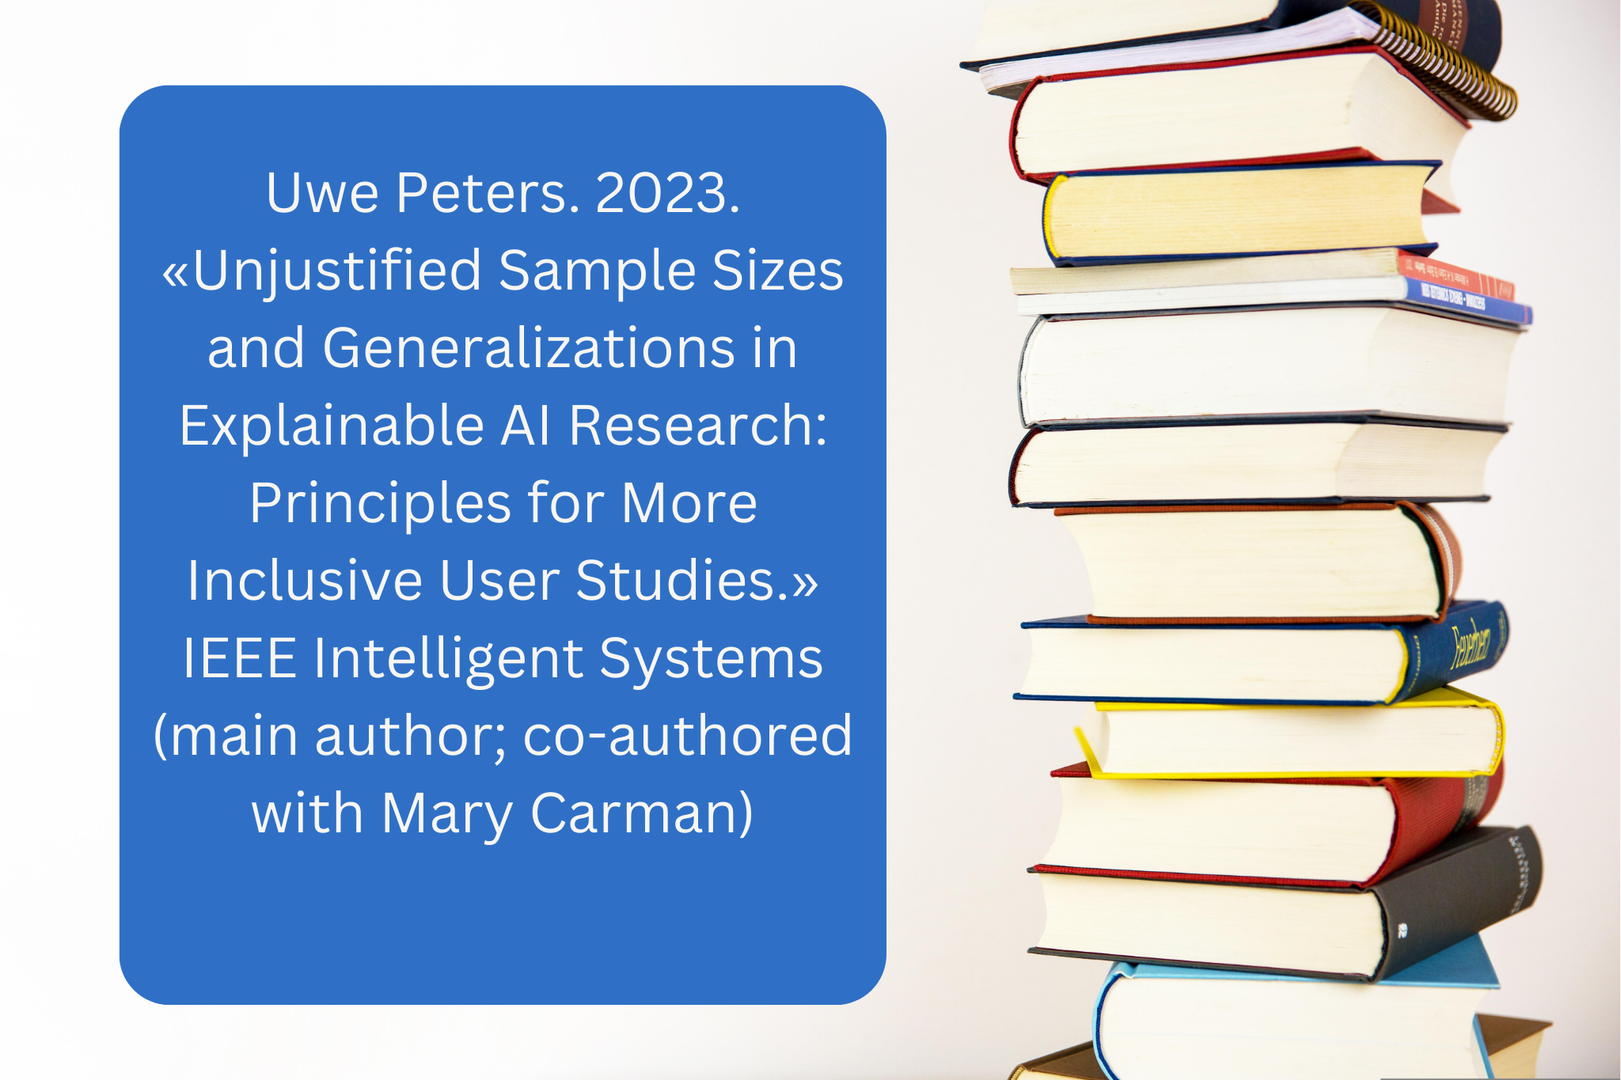 Uwe Peters. 2023. «Unjustified Sample Sizes and Generalizations in Explainable AI Research: Principles for More Inclusive User Studies.» IEEE Intelligent Systems (main author; co-authored with Mary Carman)